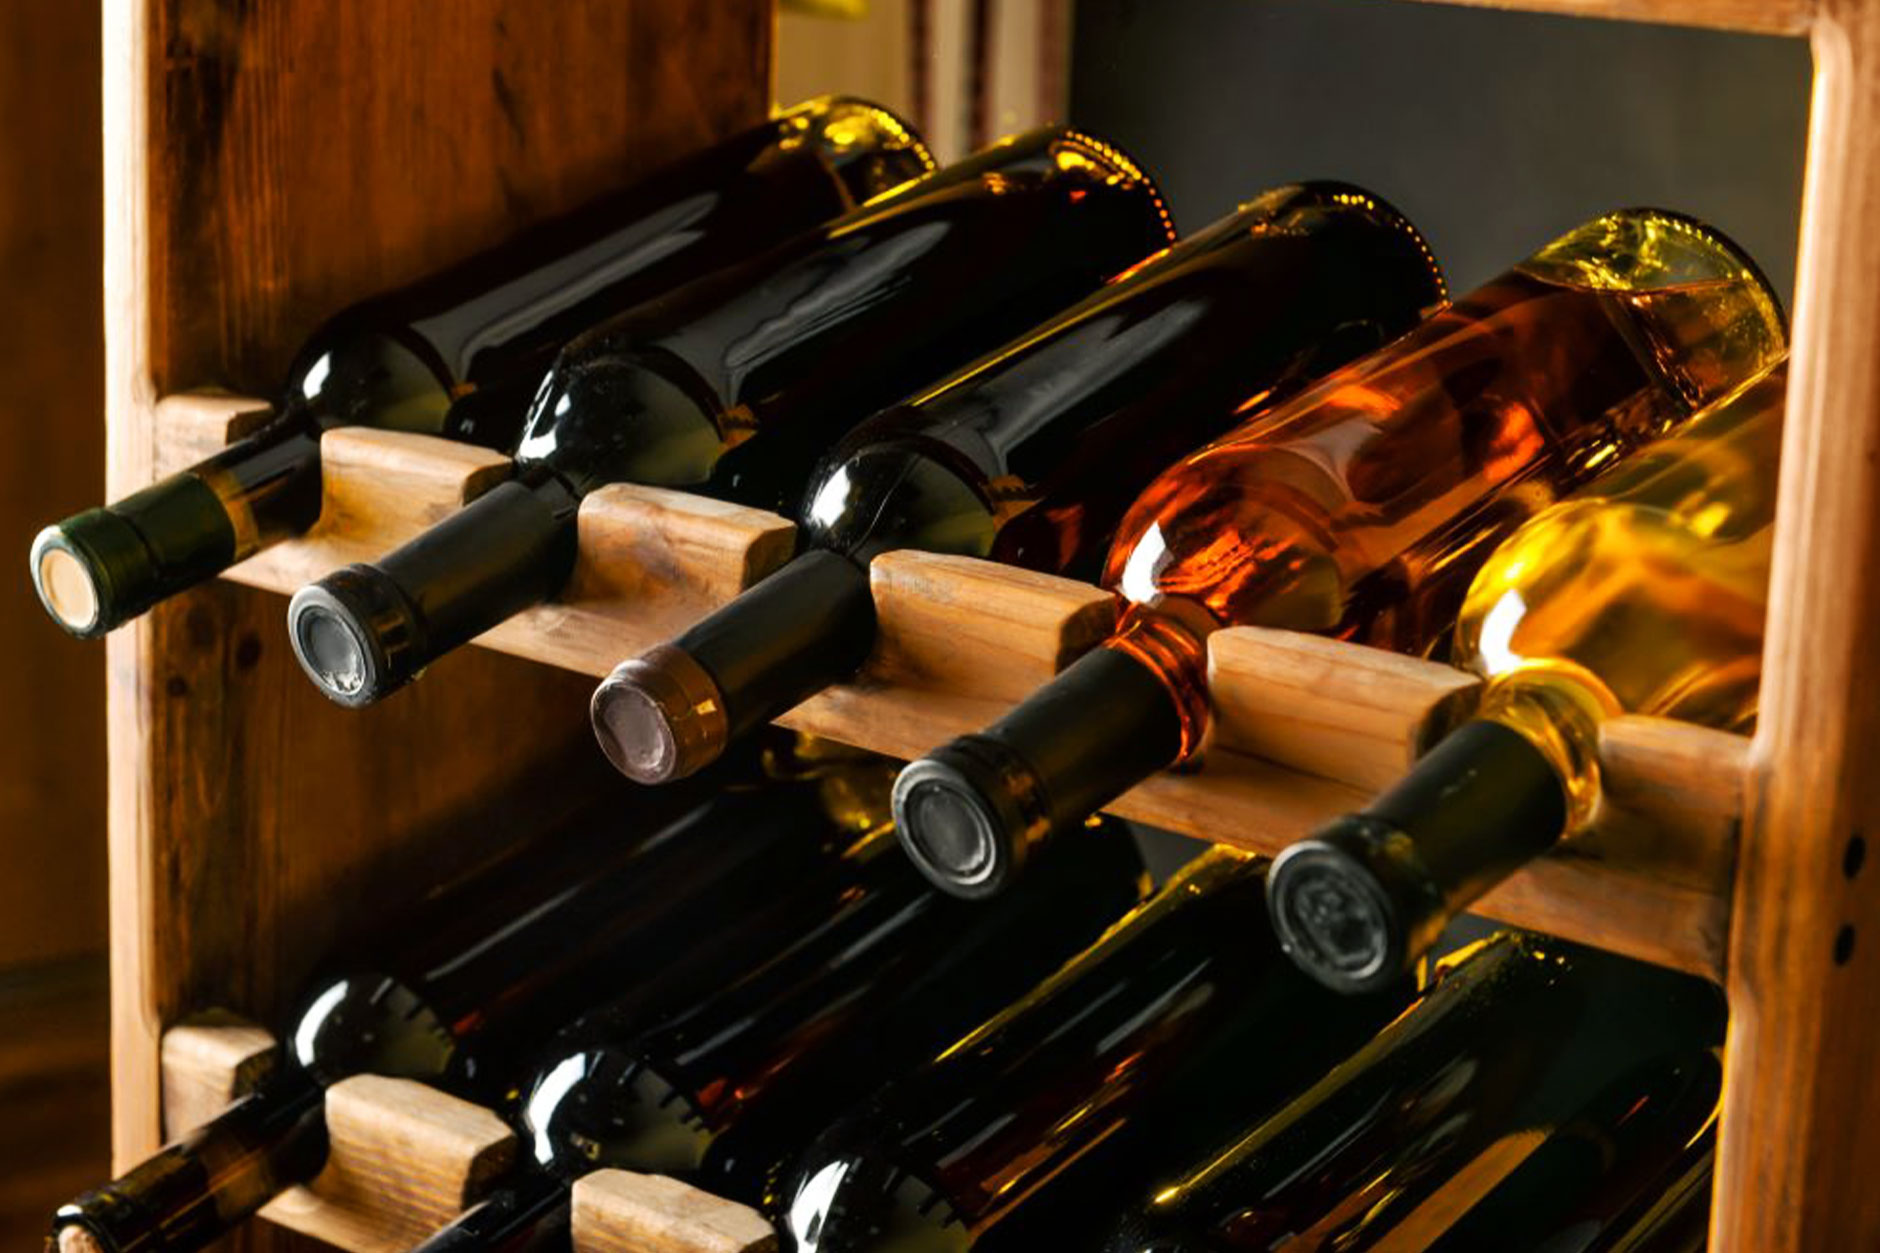 Out of stock? Get a new look for your cellar